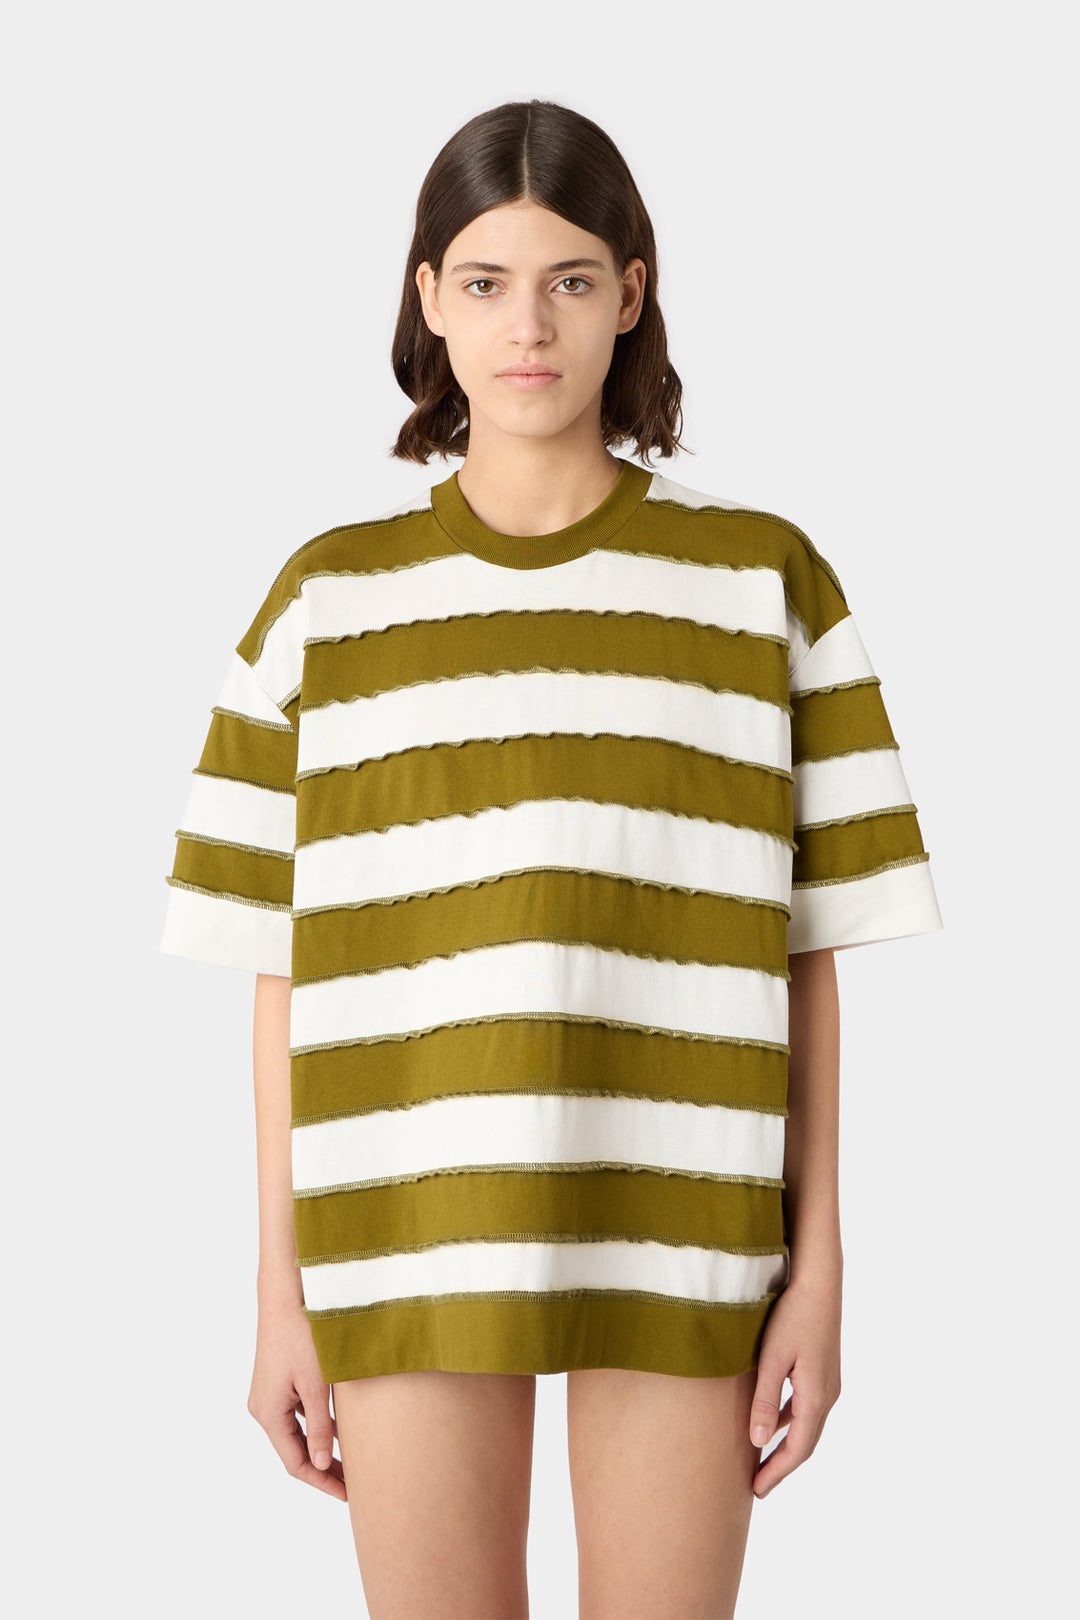 OVER T-SHIRT W/ CUTS / green & white stripes - 3